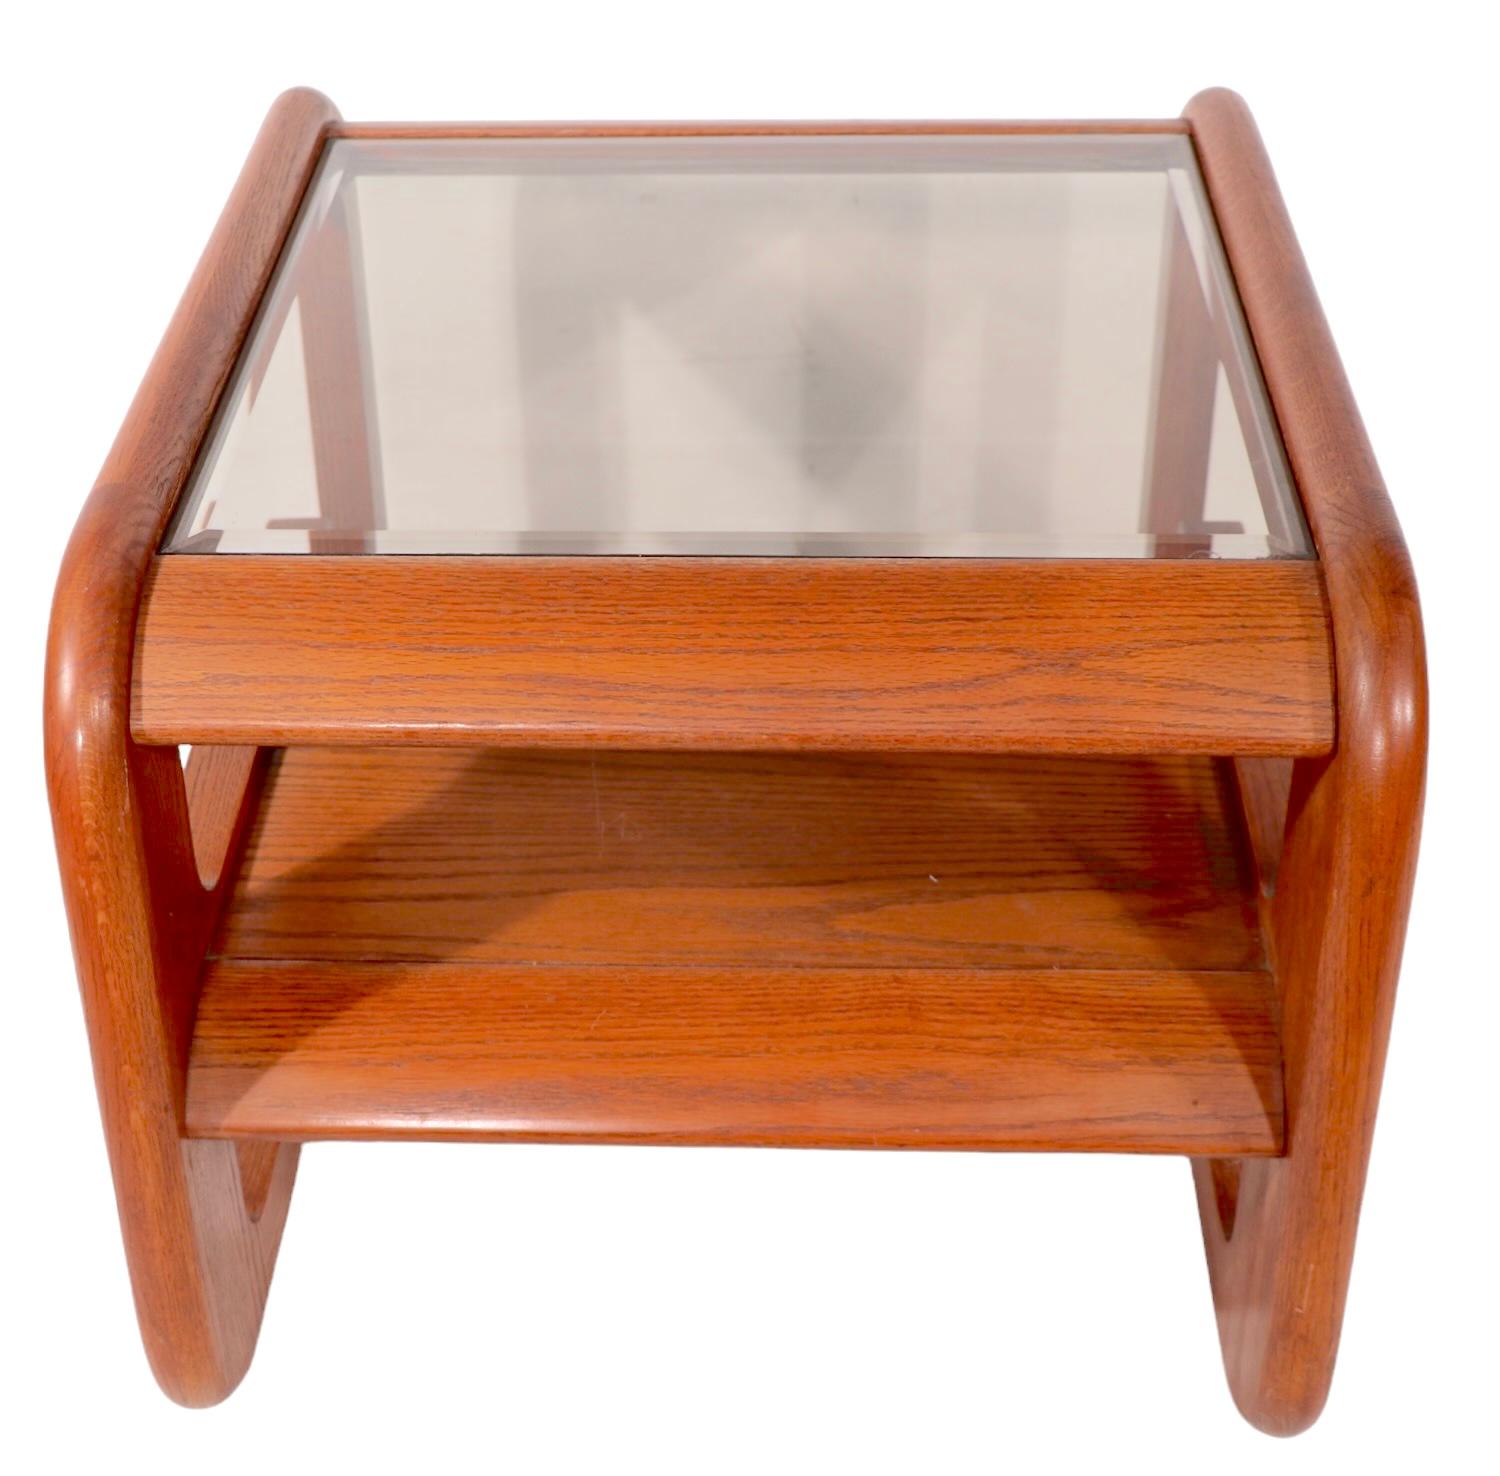 Post-Modern Post Modern Square Mersman End Table designed by Lou Hodges for Mersman c. 1970s For Sale